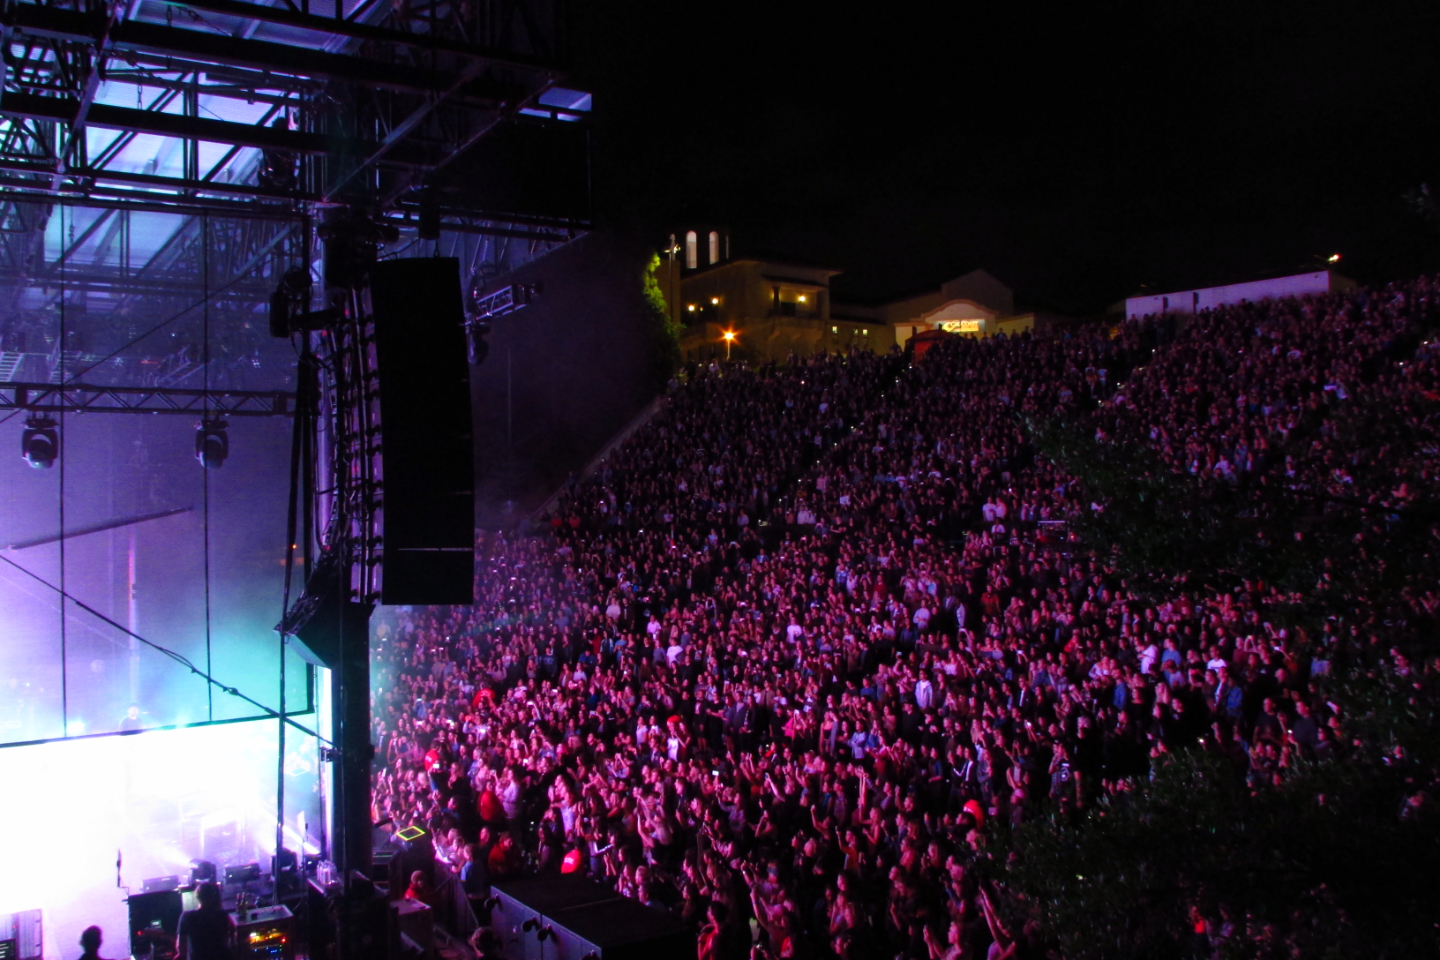 Thousands of people gather at an amphitheater to watch a rock band playing at night.